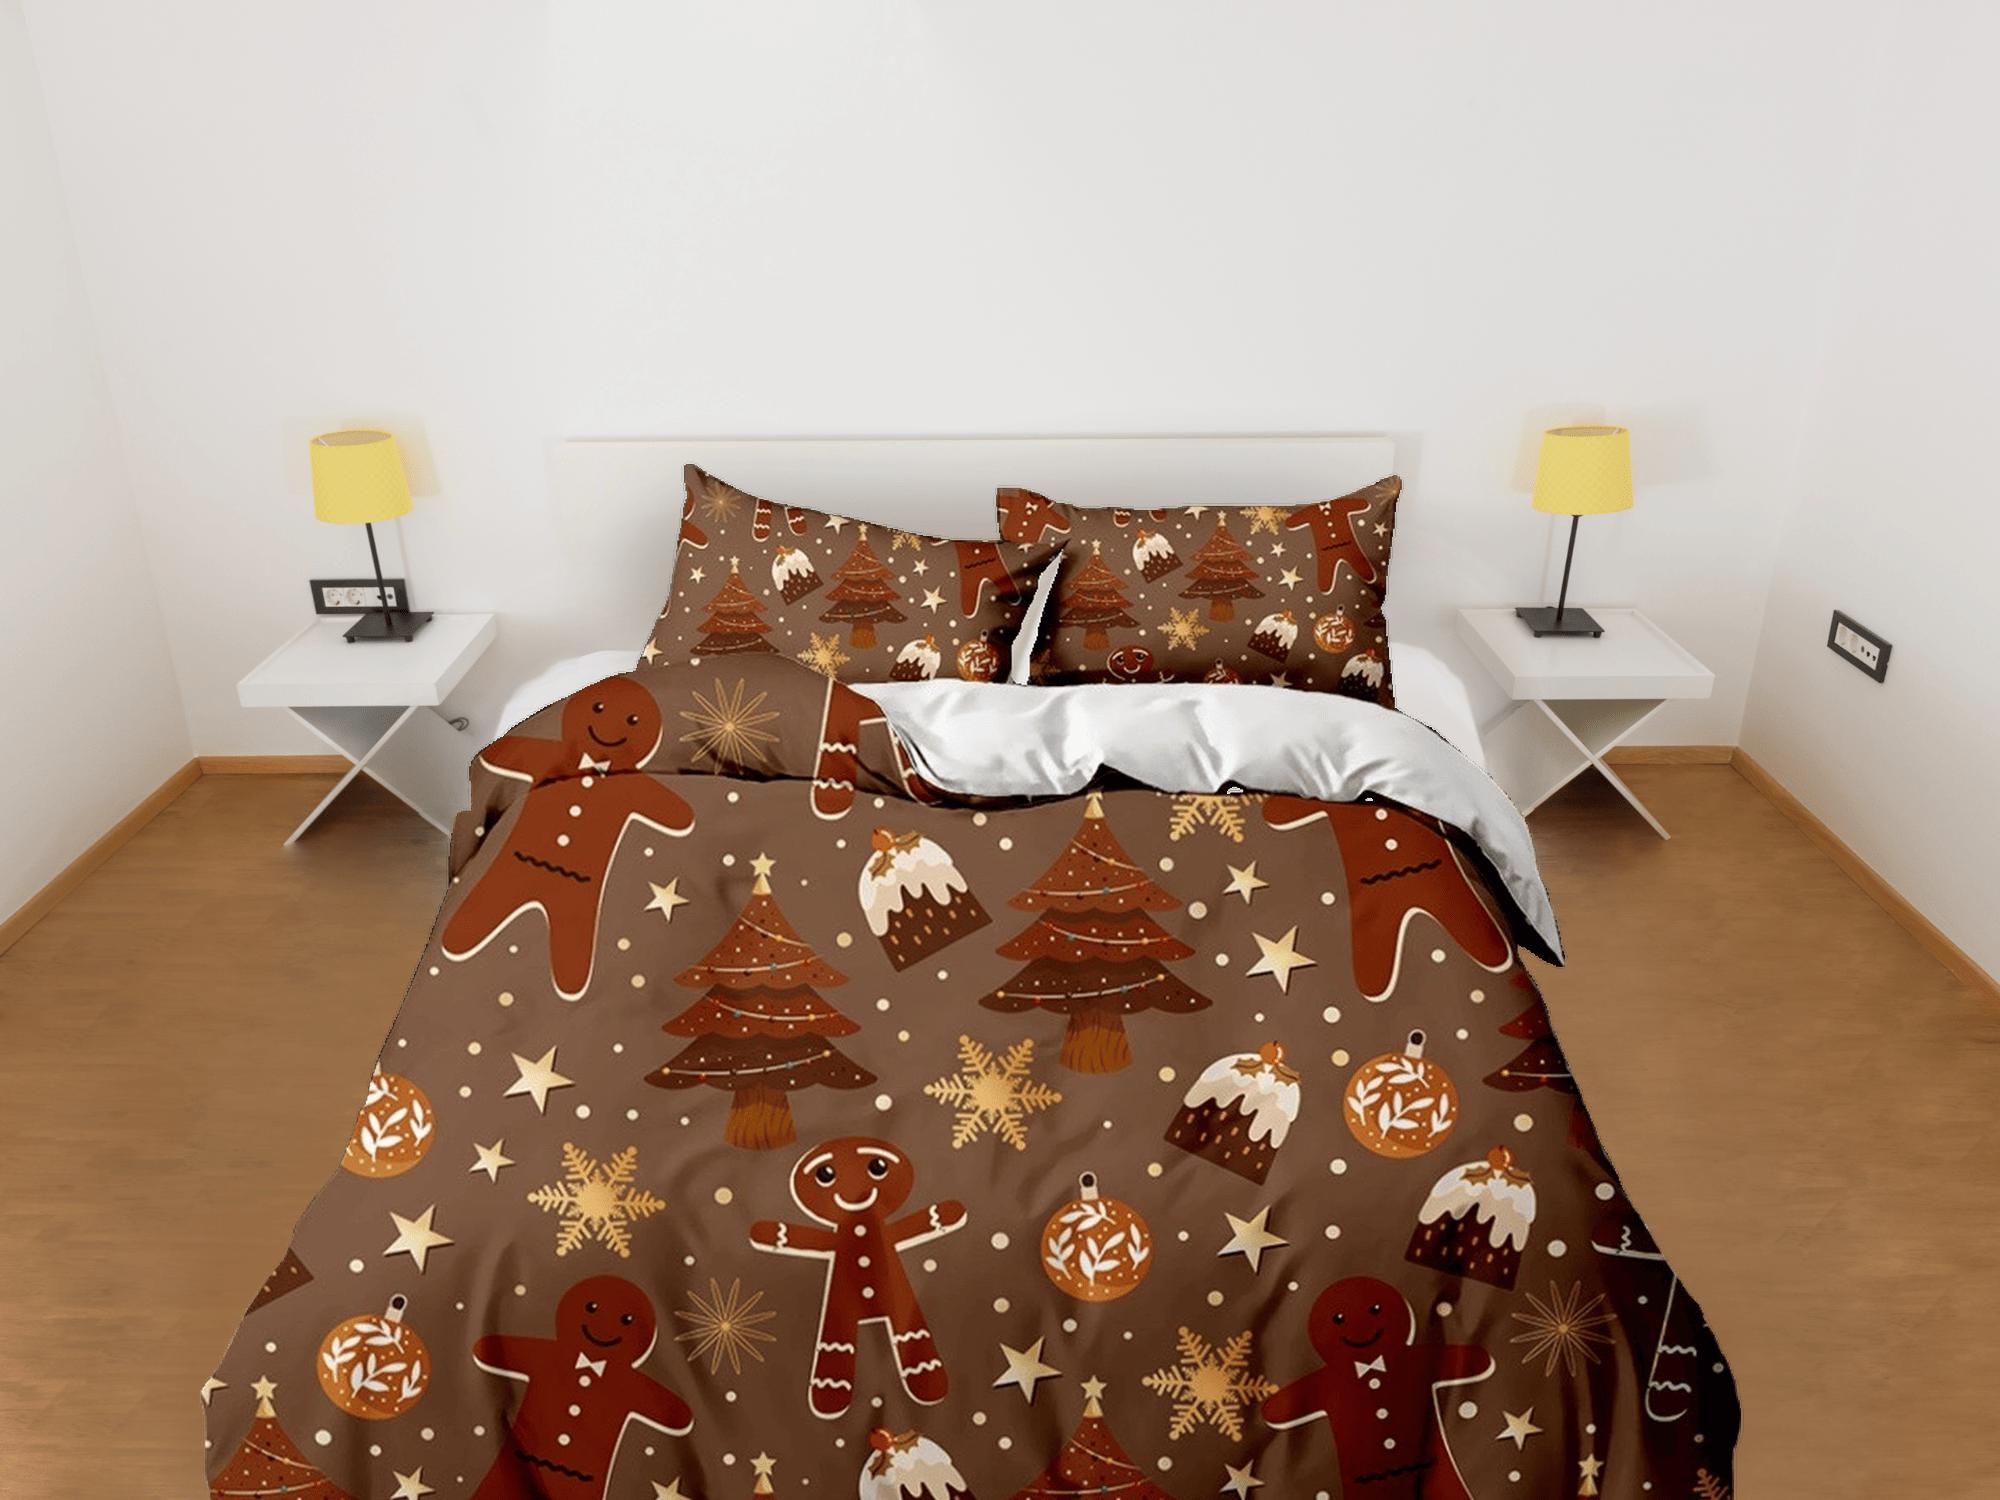 daintyduvet Chocolatey gingerbread Christmas bedding, pillowcase holiday gift brown duvet cover king queen twin toddler bedding baby Christmas farmhouse